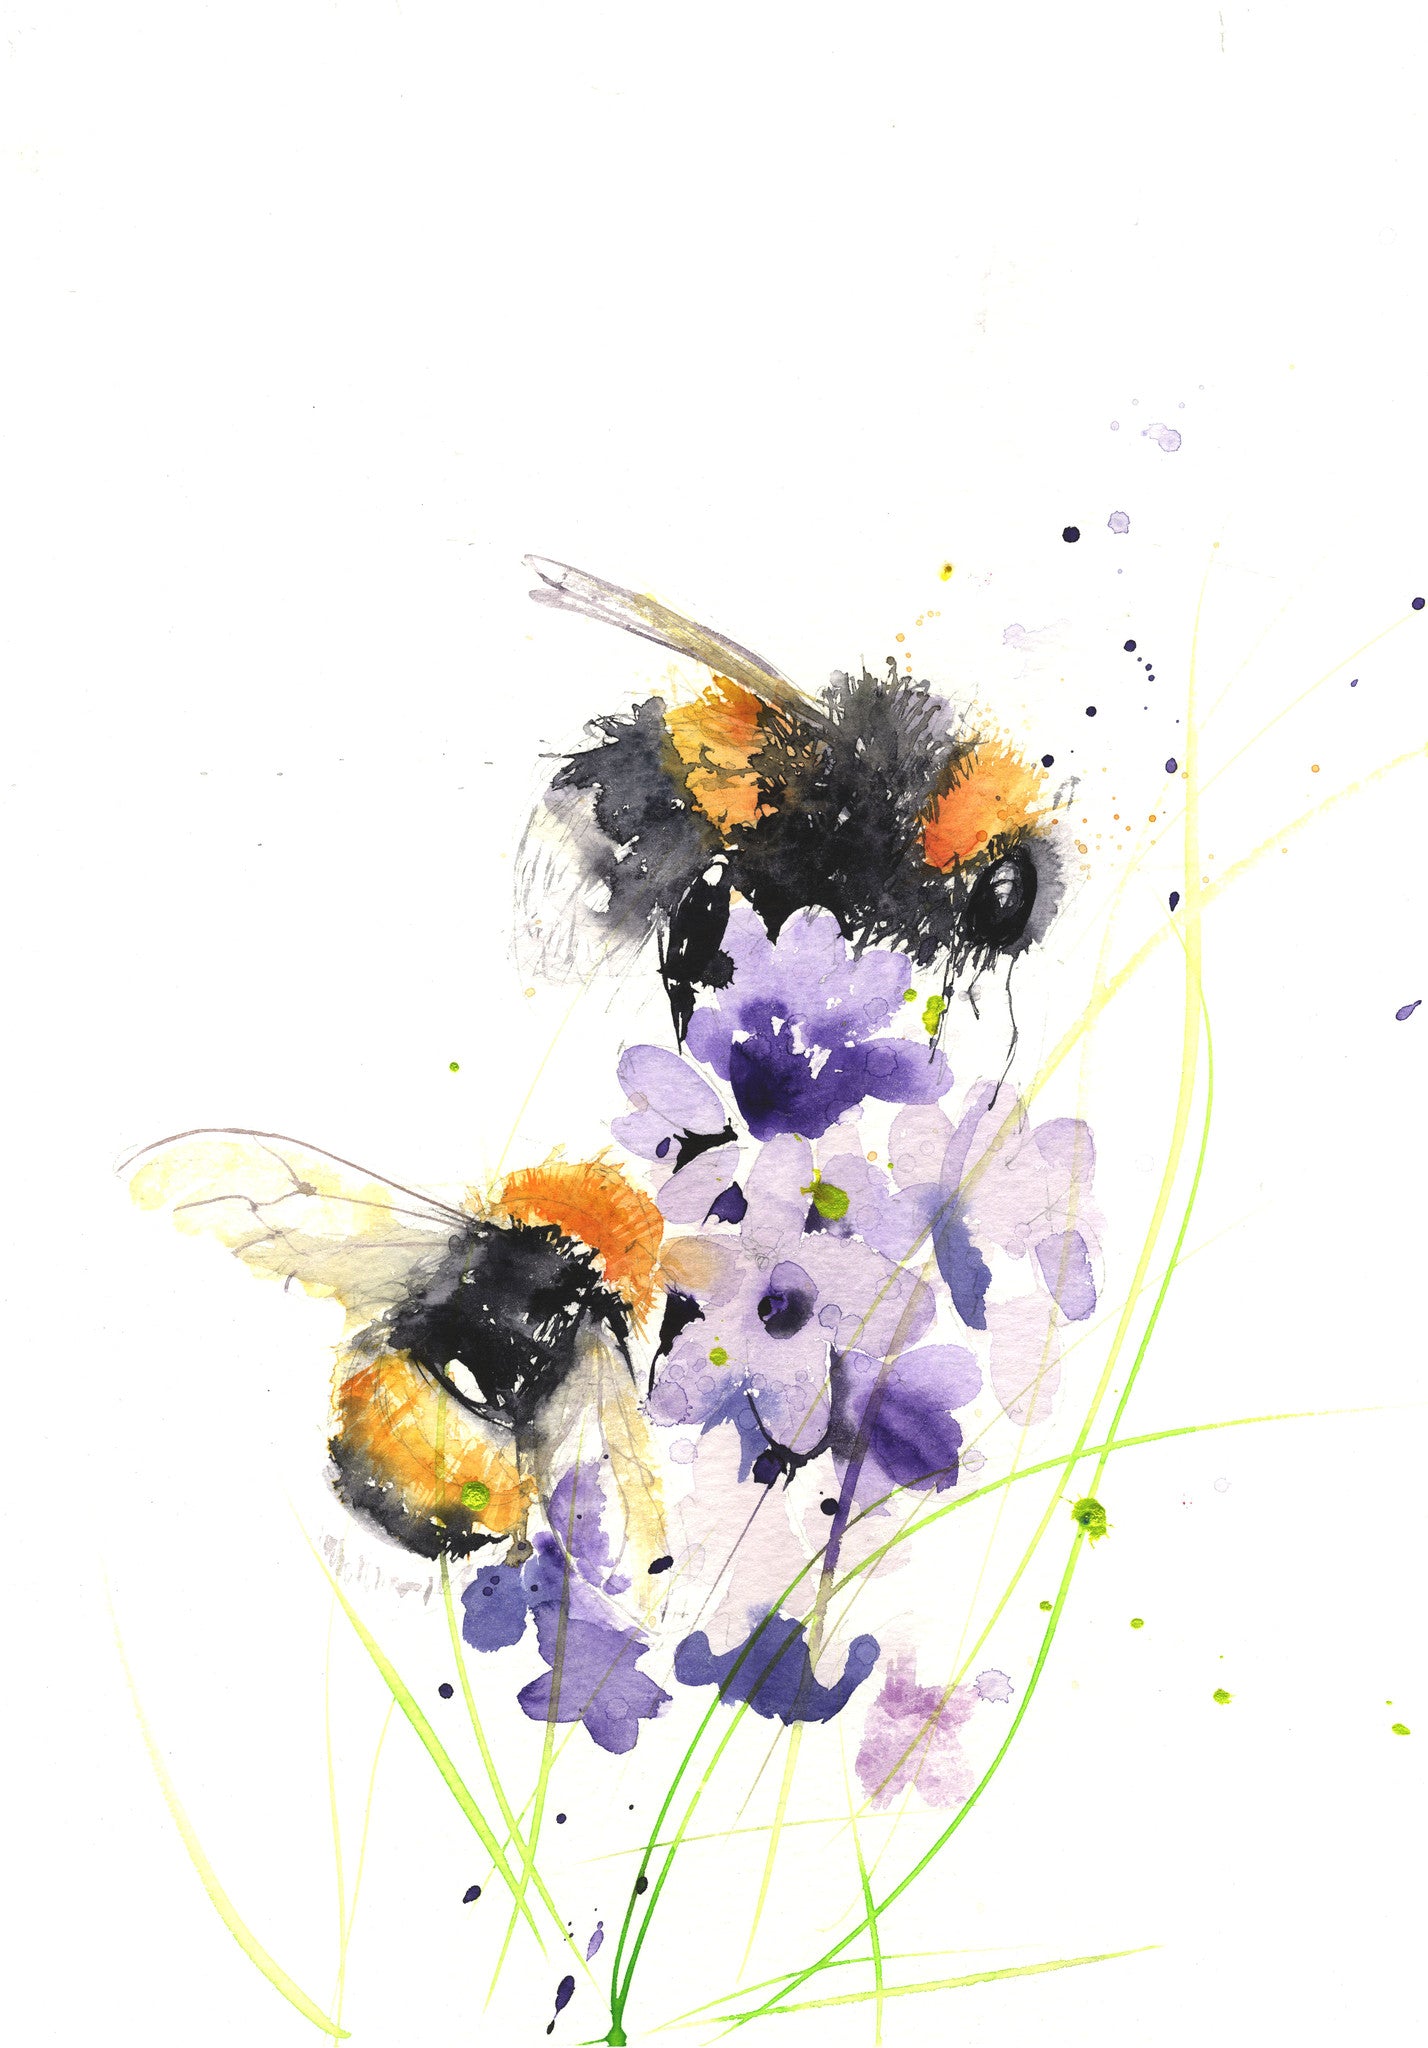 LIMITED EDITON PRINT of my original BUMBLE BEEs on a delphinium - Jen Buckley Art limited edition animal art prints